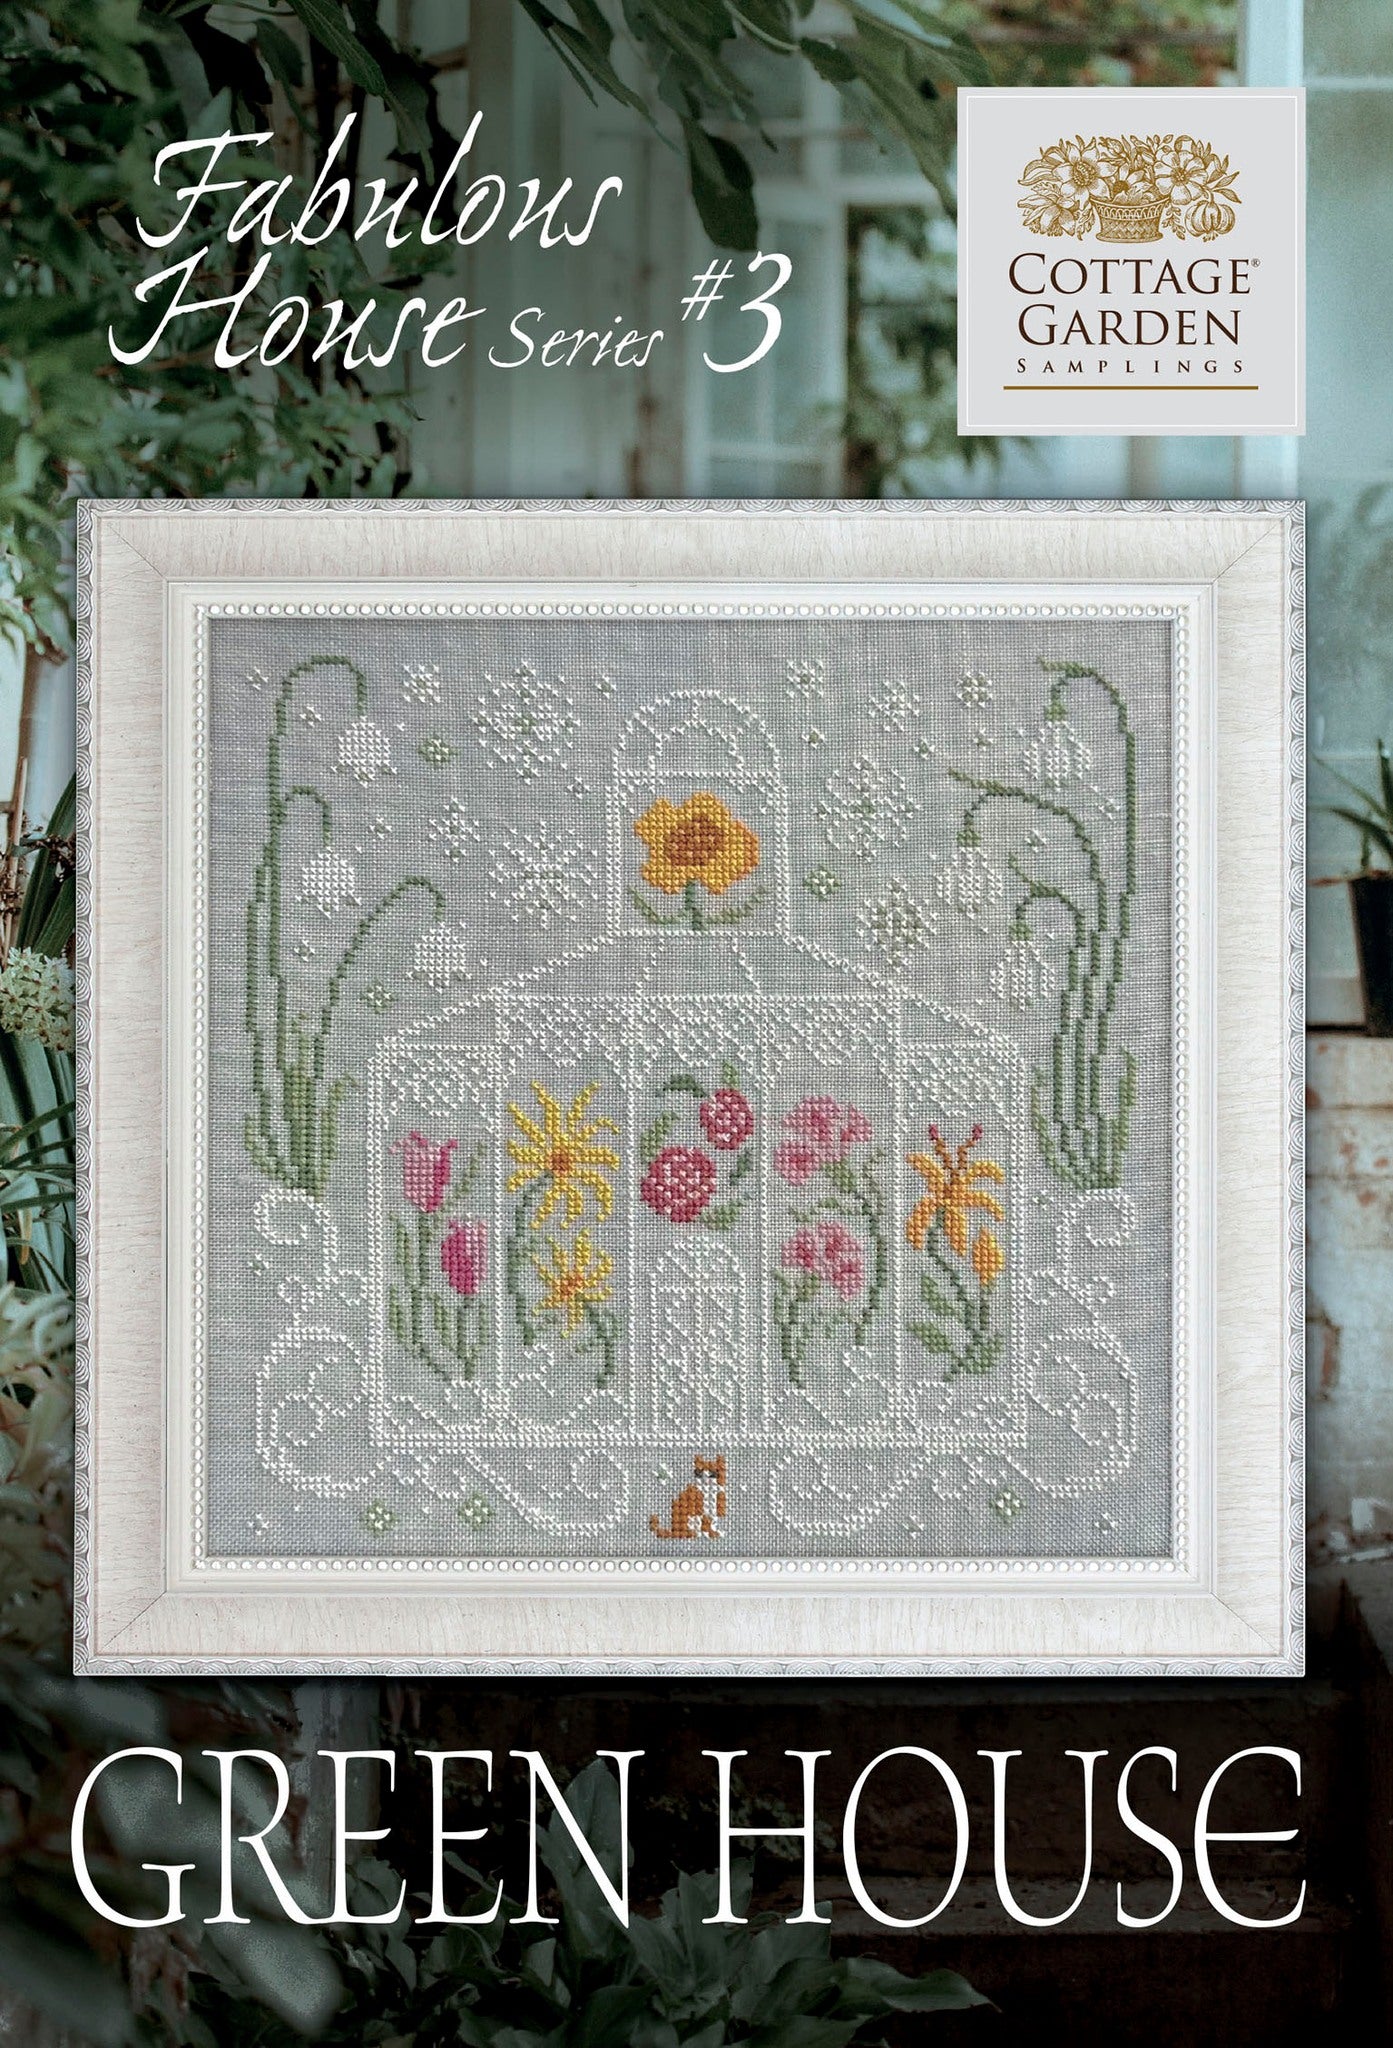 The Greenhouse - #3 Fabulous Houses - Cross Stitch Chart by Cottage Garden Samplings